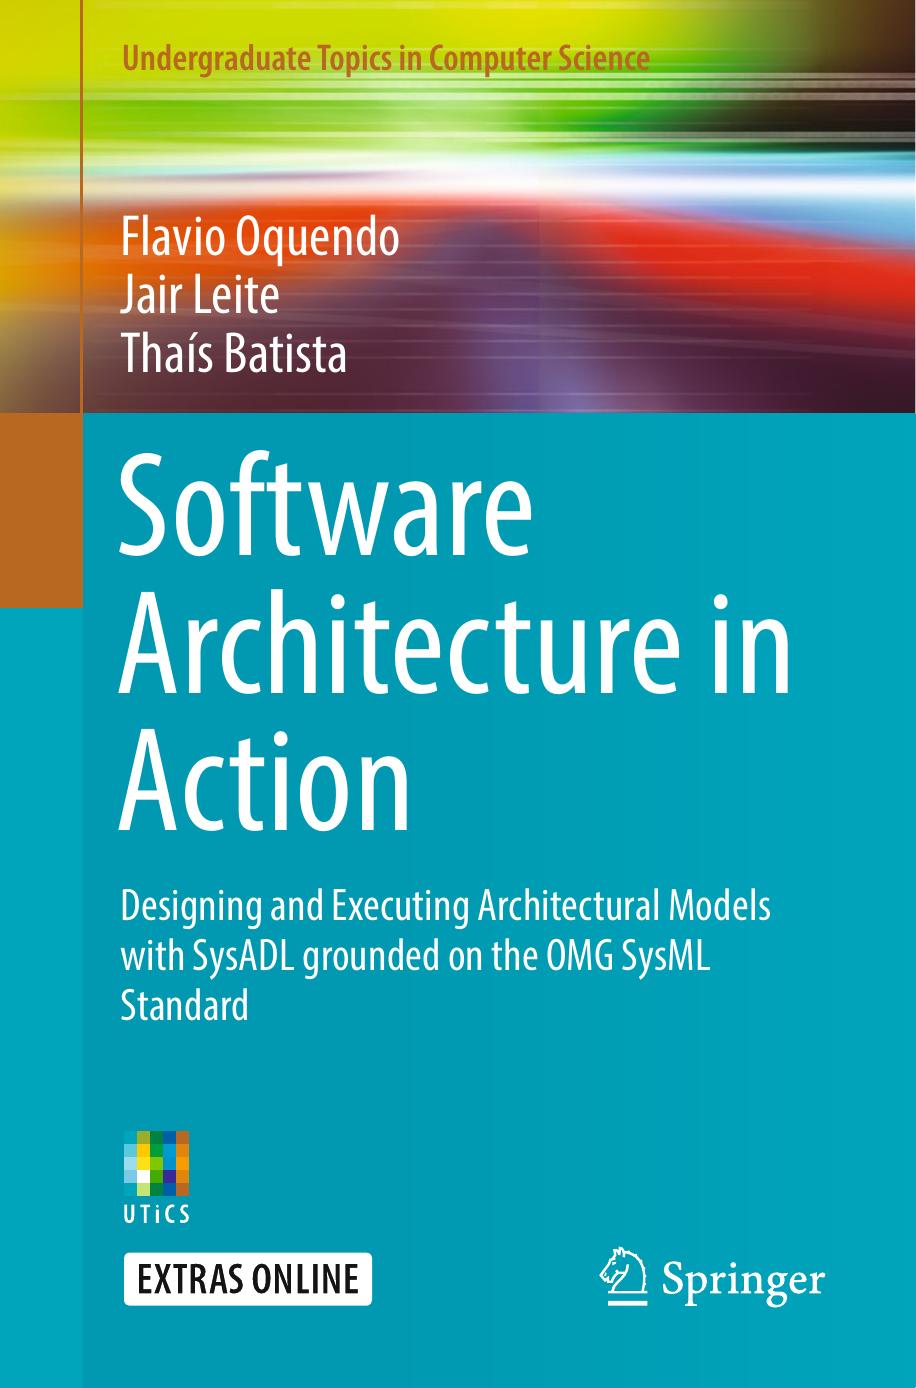 Software Architecture in Action: Designing and Executing Architectural Models With SysADL Grounded on the OMG SysML Standard